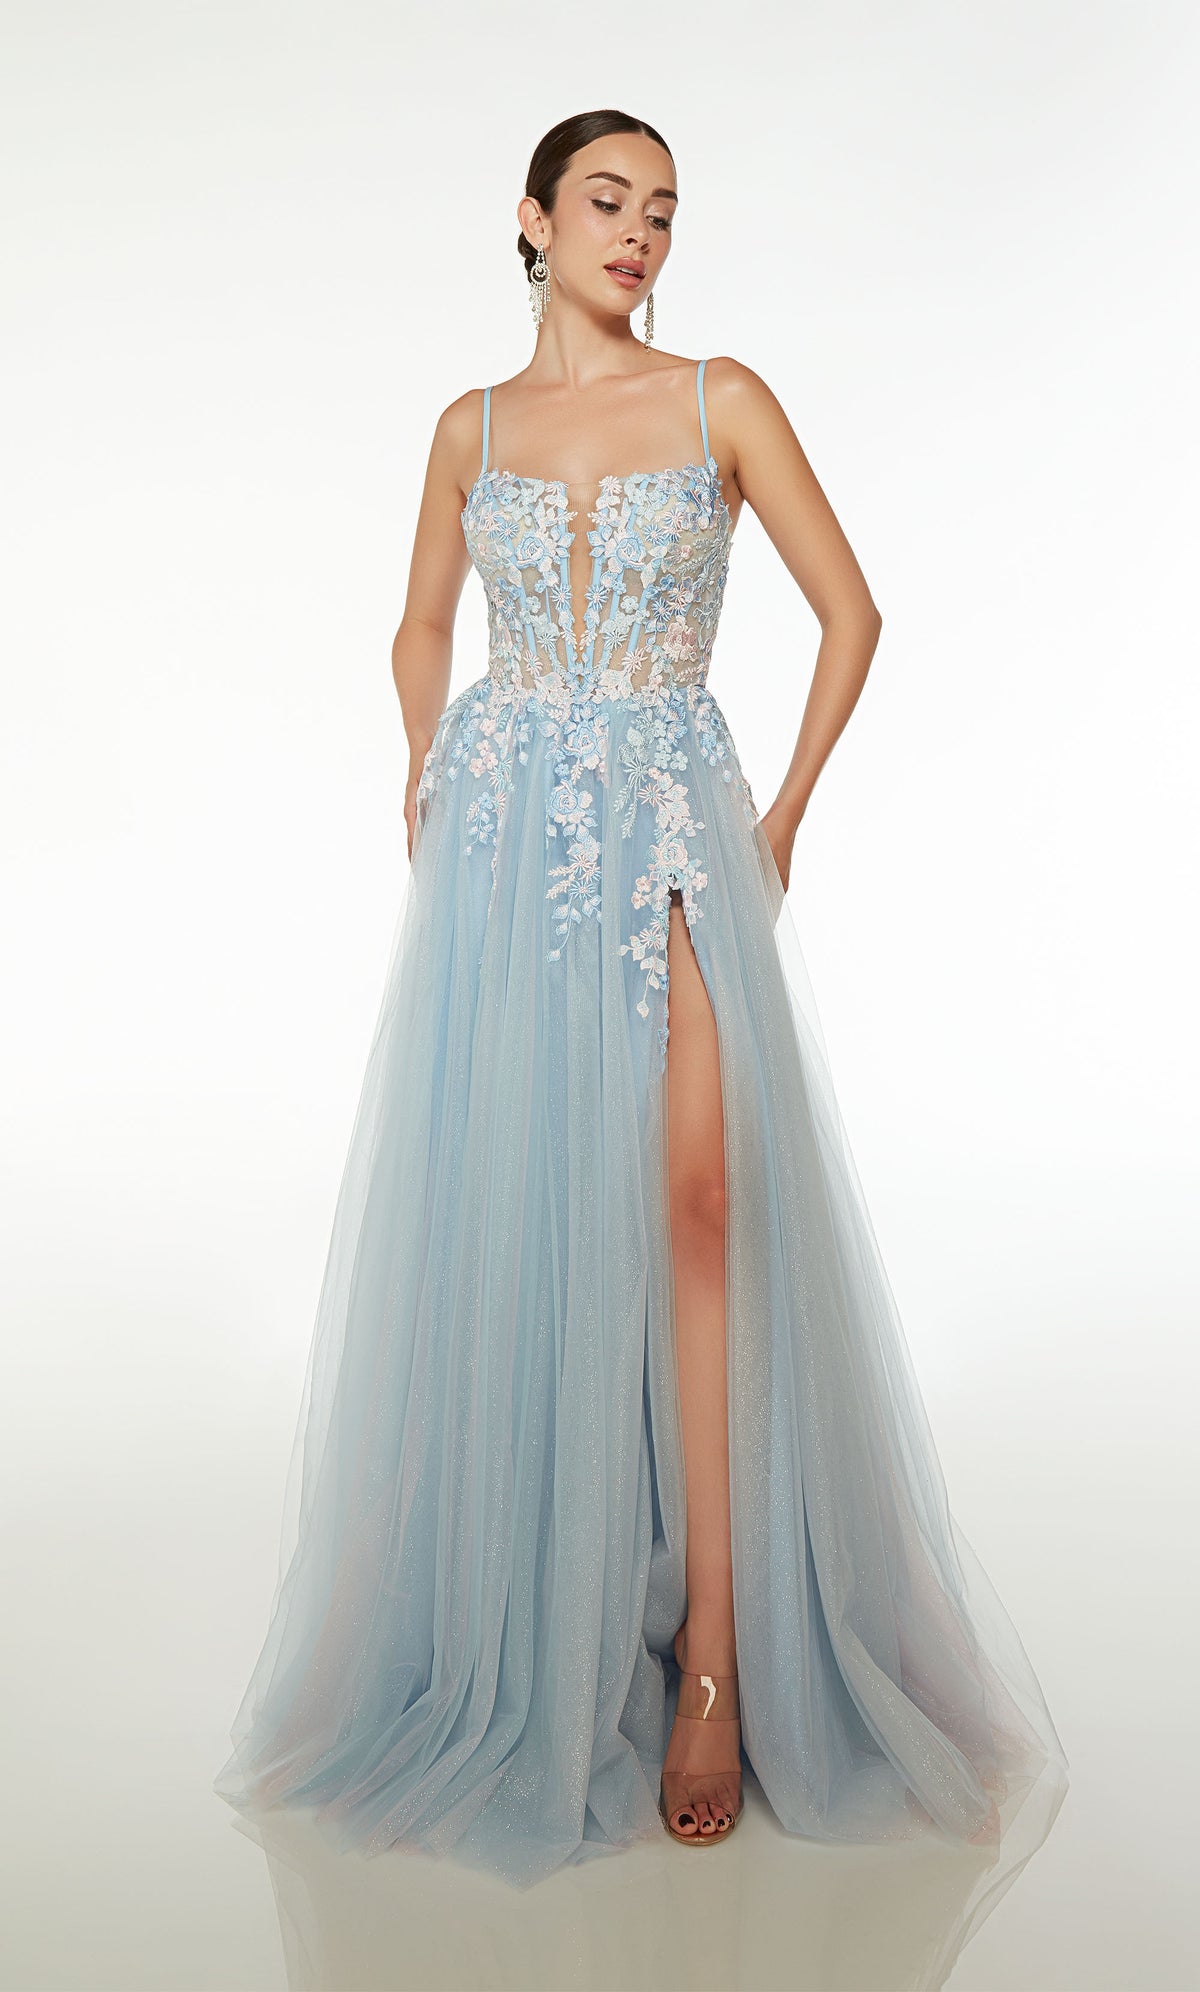 Light blue-pink A-line tulle gown with an sheer corset bodice, high slit, spaghetti straps, lace-up back, slight train, and delicate floral lace appliques.